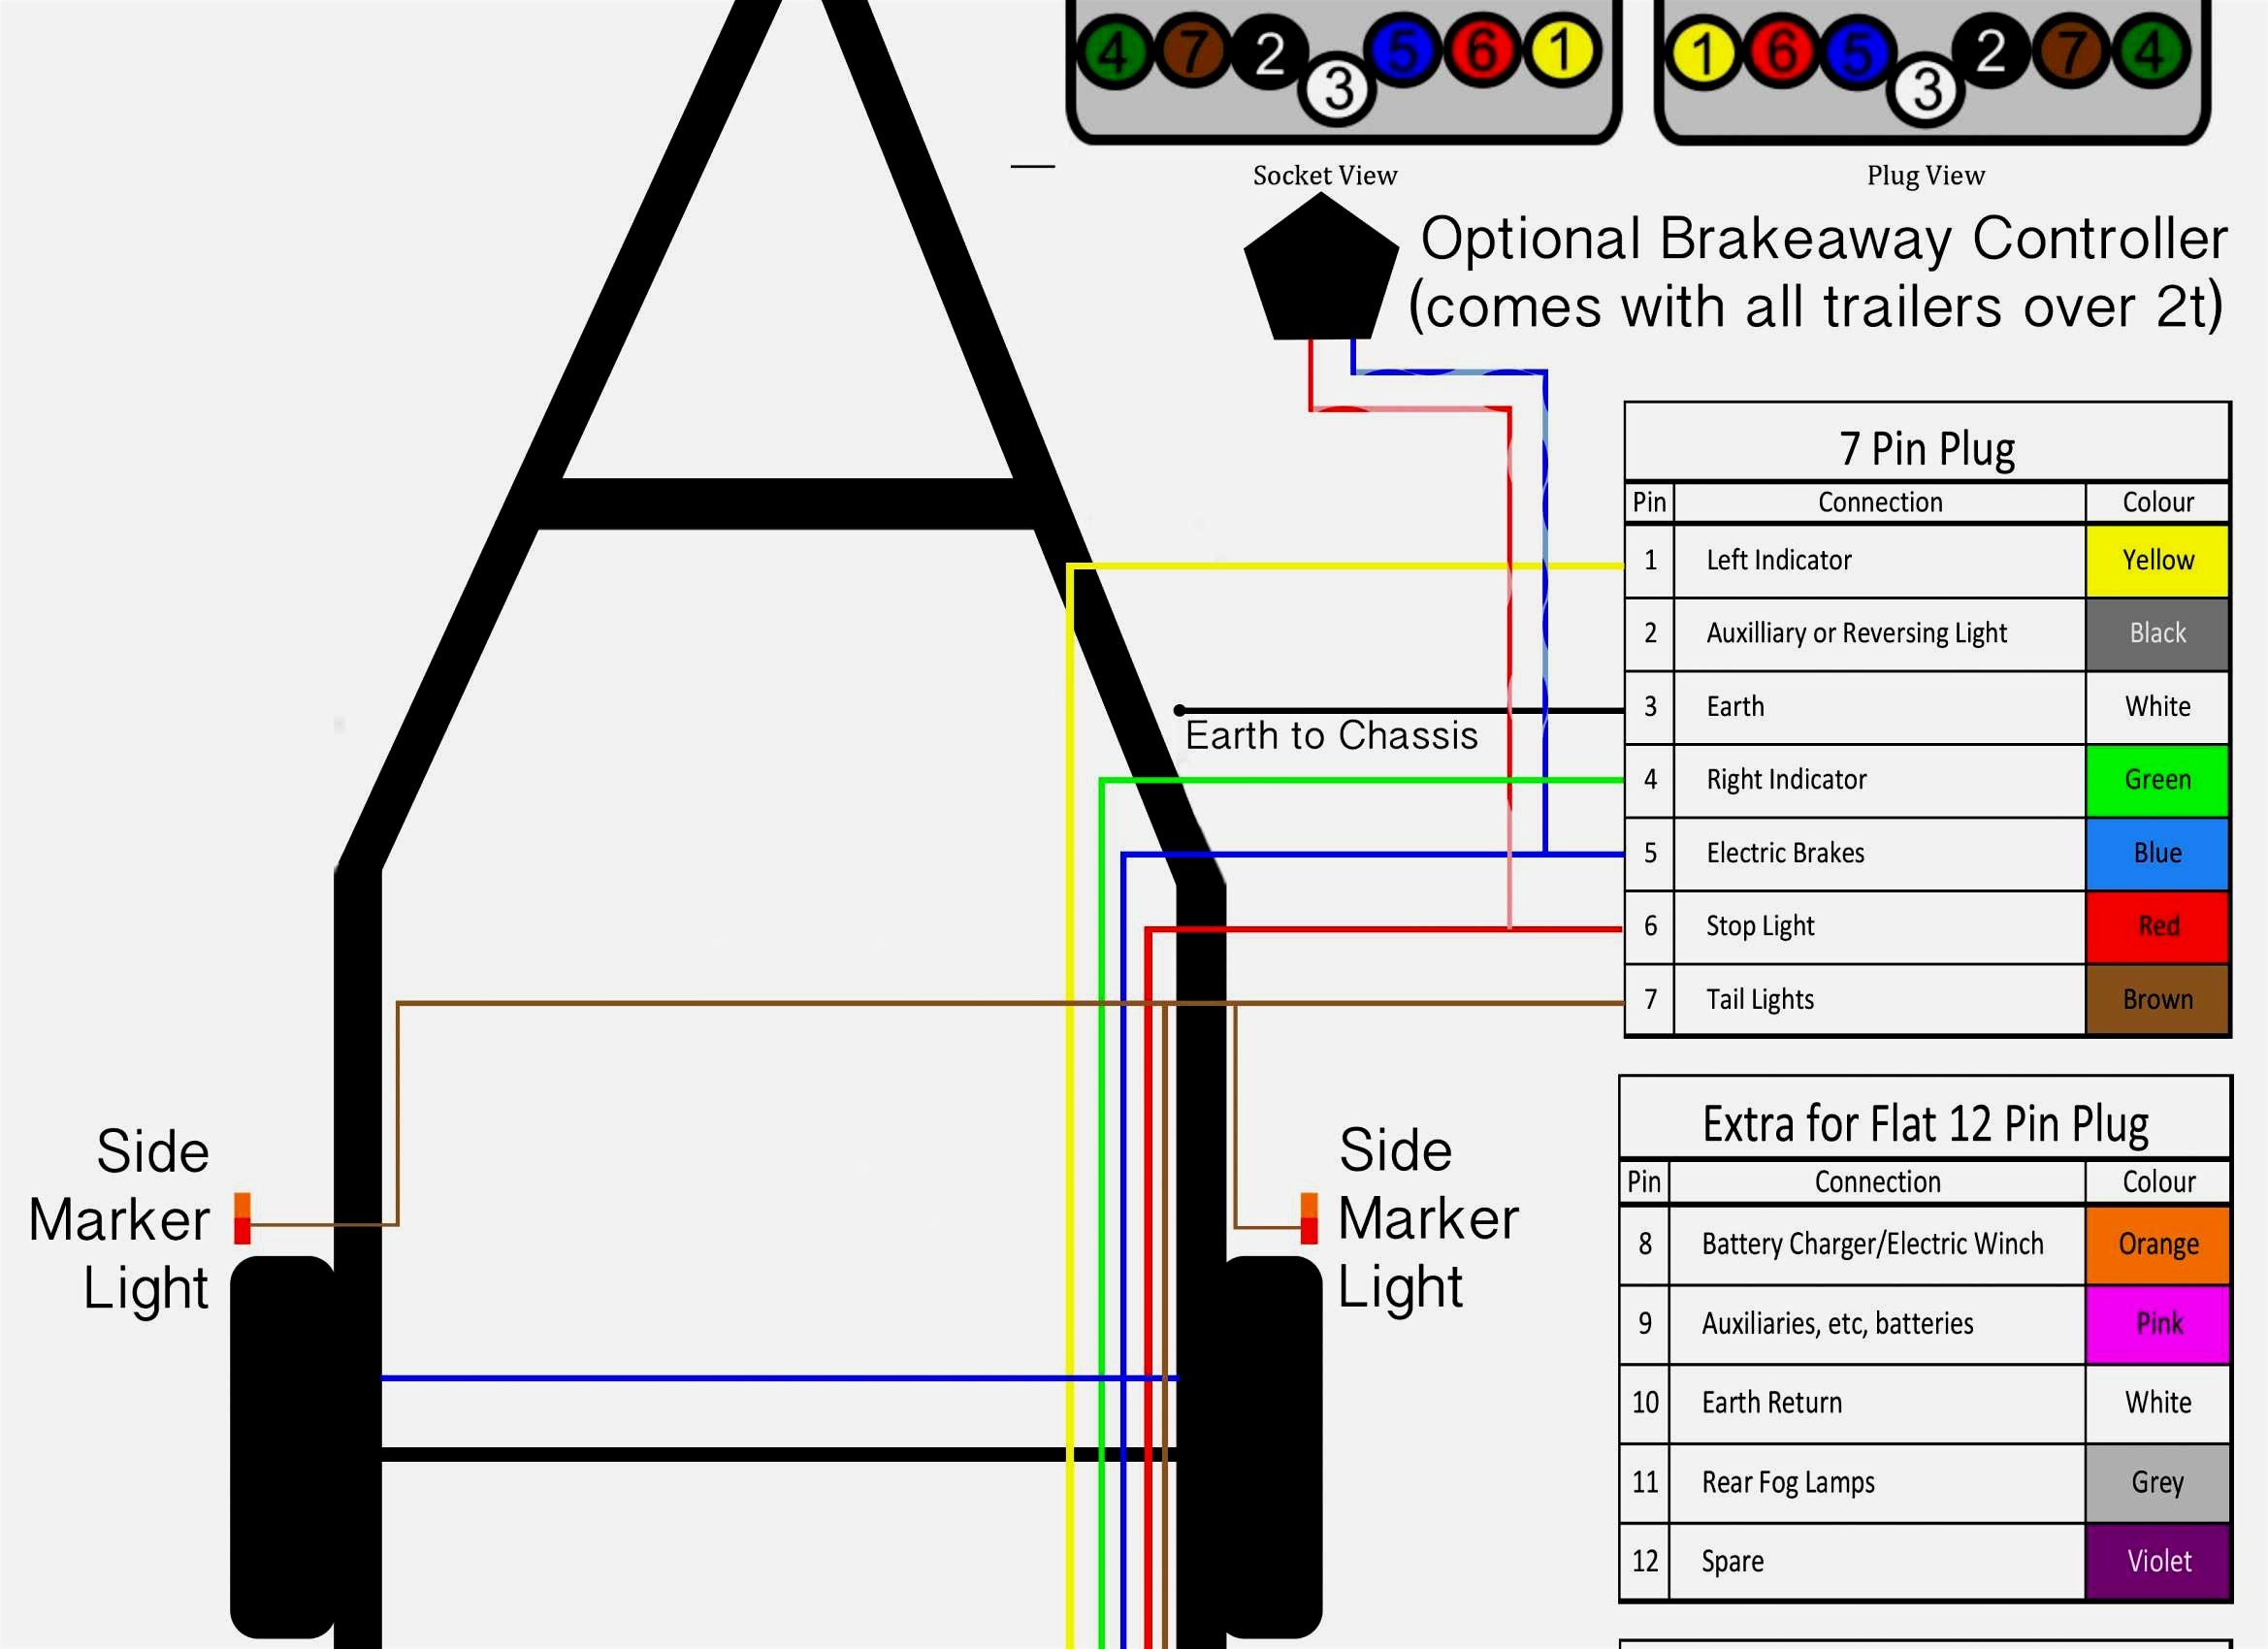 Trailer Wiring Diagram 7 Way Plug Best towing Plug Everything You Need to Know About Wiring Of Trailer Wiring Diagram 7 Way Plug